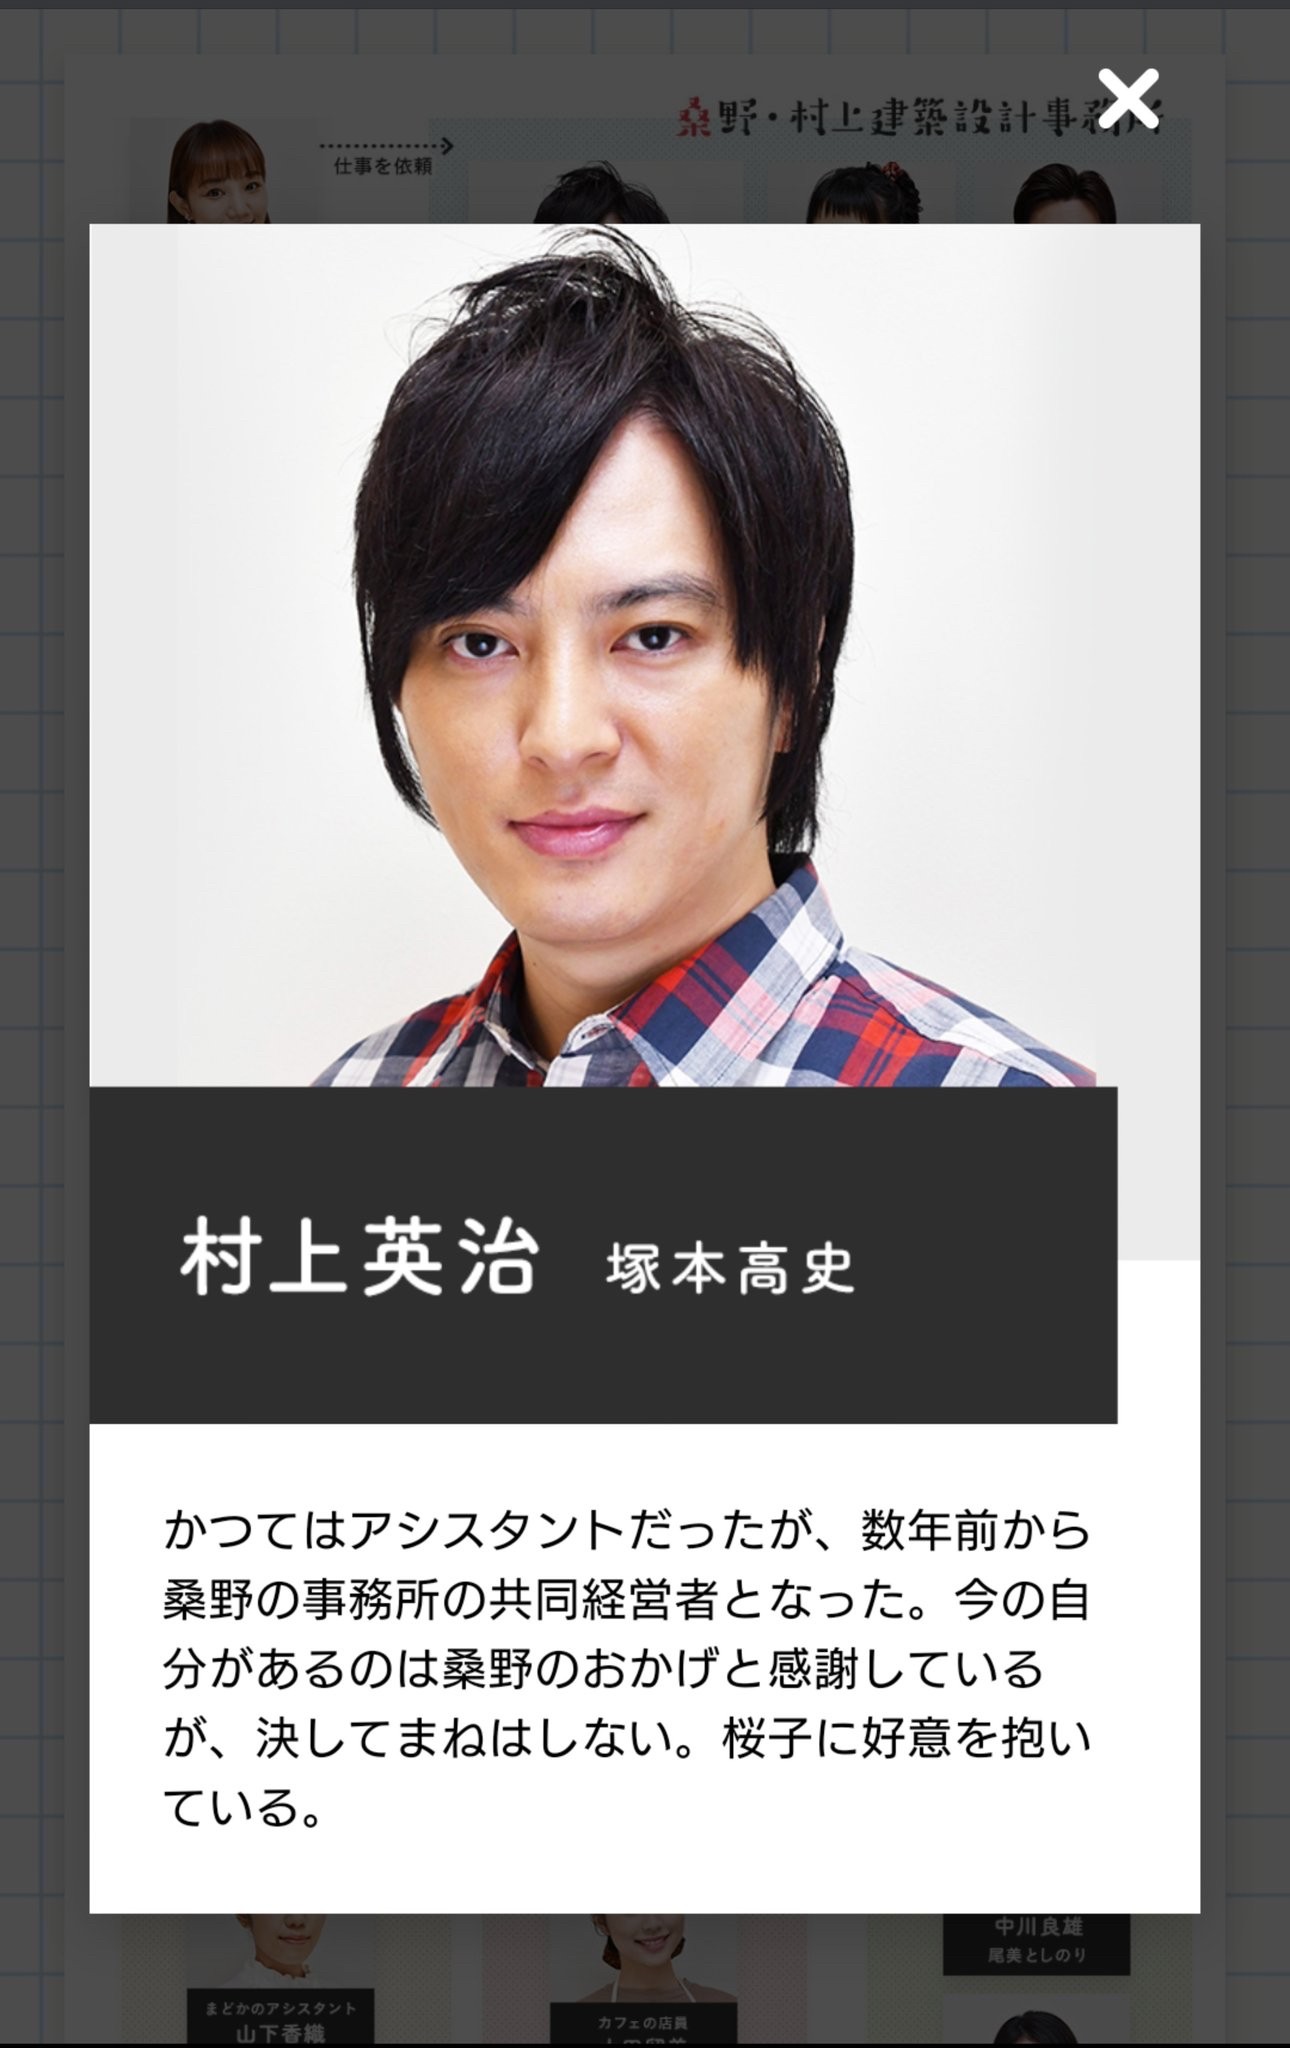 [Explosion speed] Hiroshi Abe, drama official HP